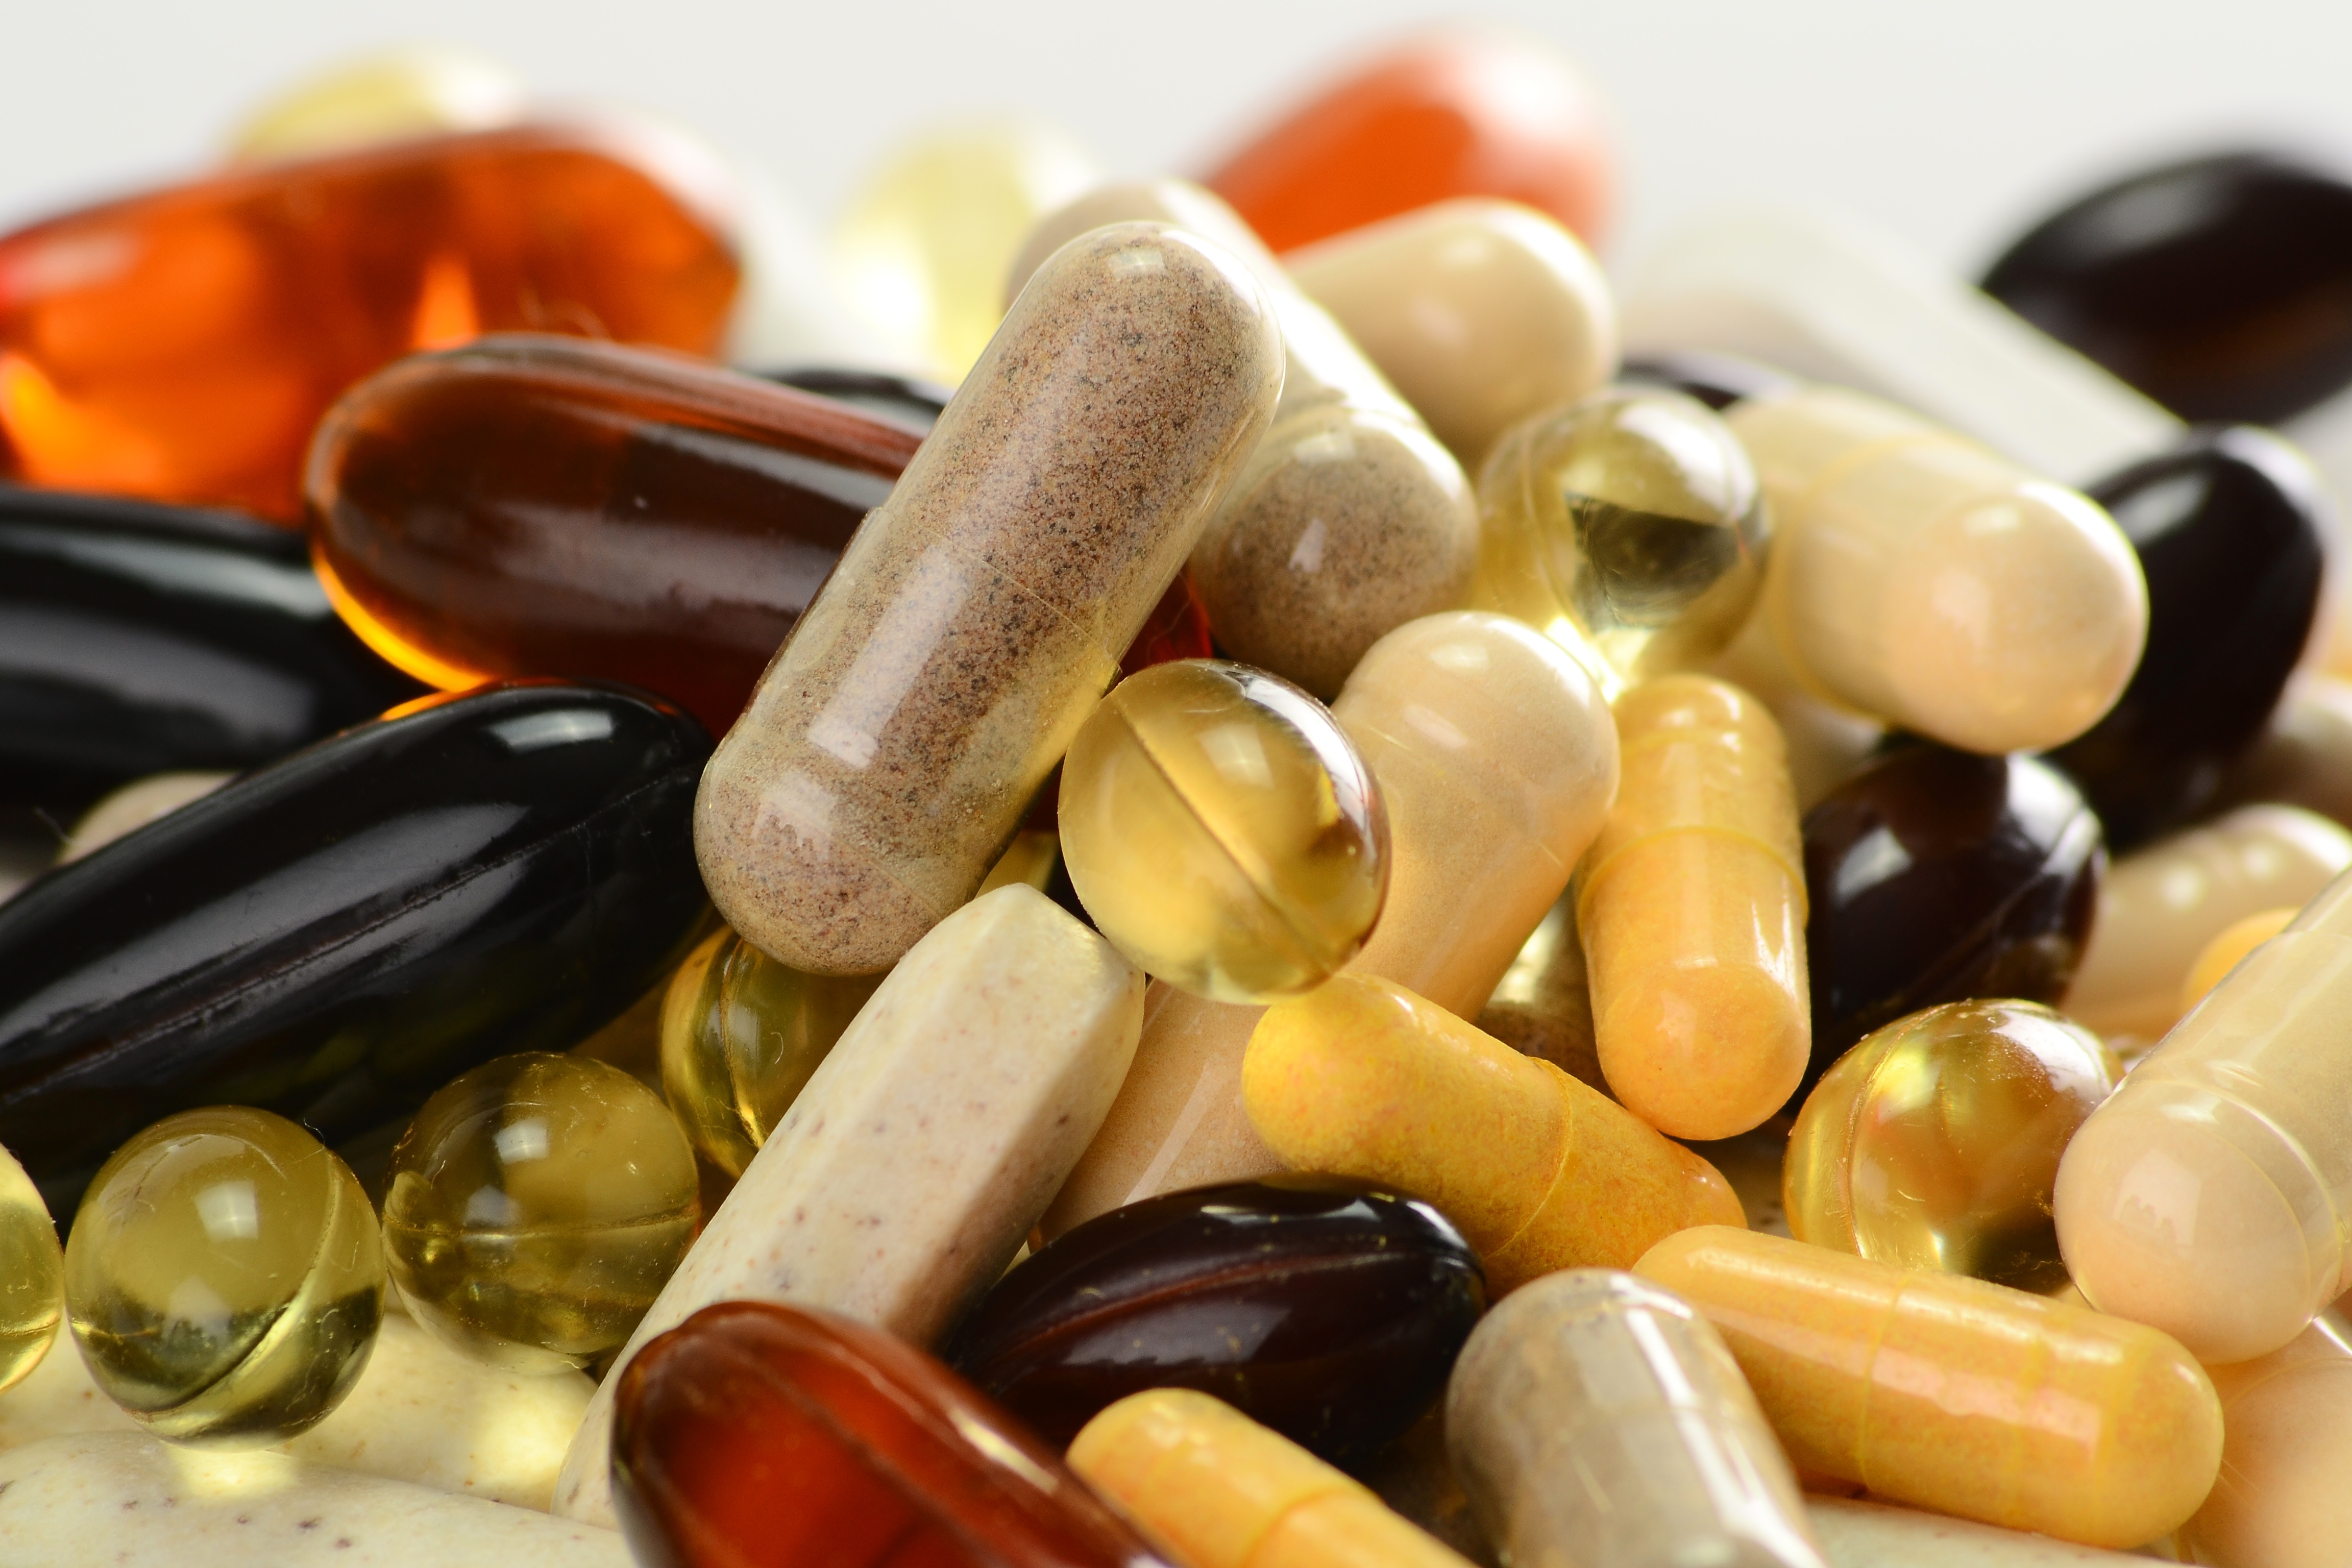 Multivitamin trial suggests some benefits for mood and wellbeing